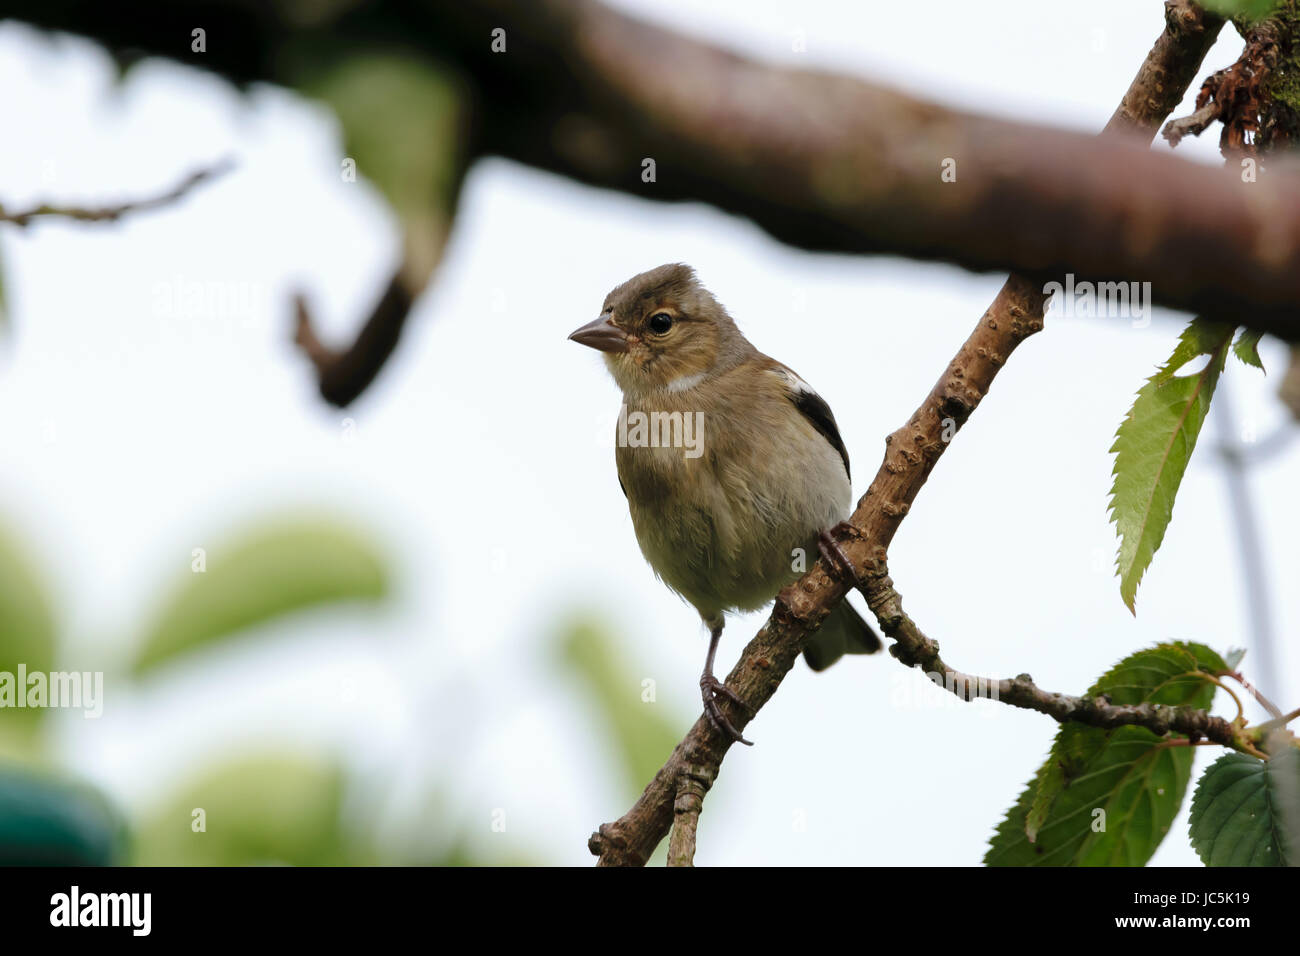 Young Chaffinch Songbird Bird Perching on a Branch - Wales, UK Stock Photo